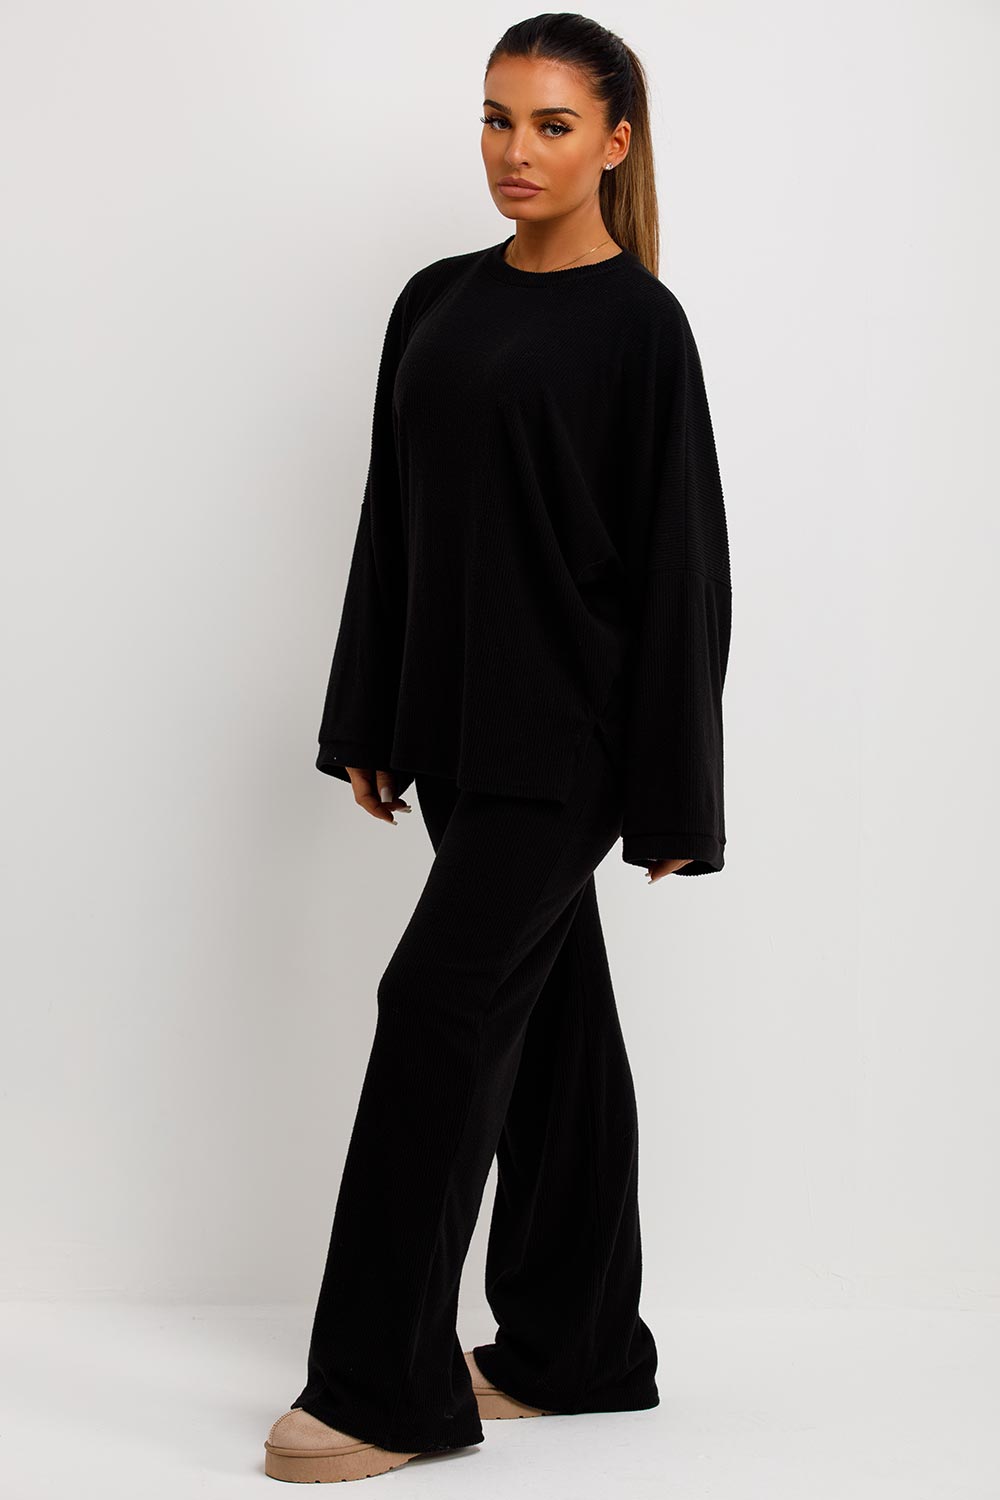 womens drop shoulder oversized ribbed top and trousers loungewear co ord set